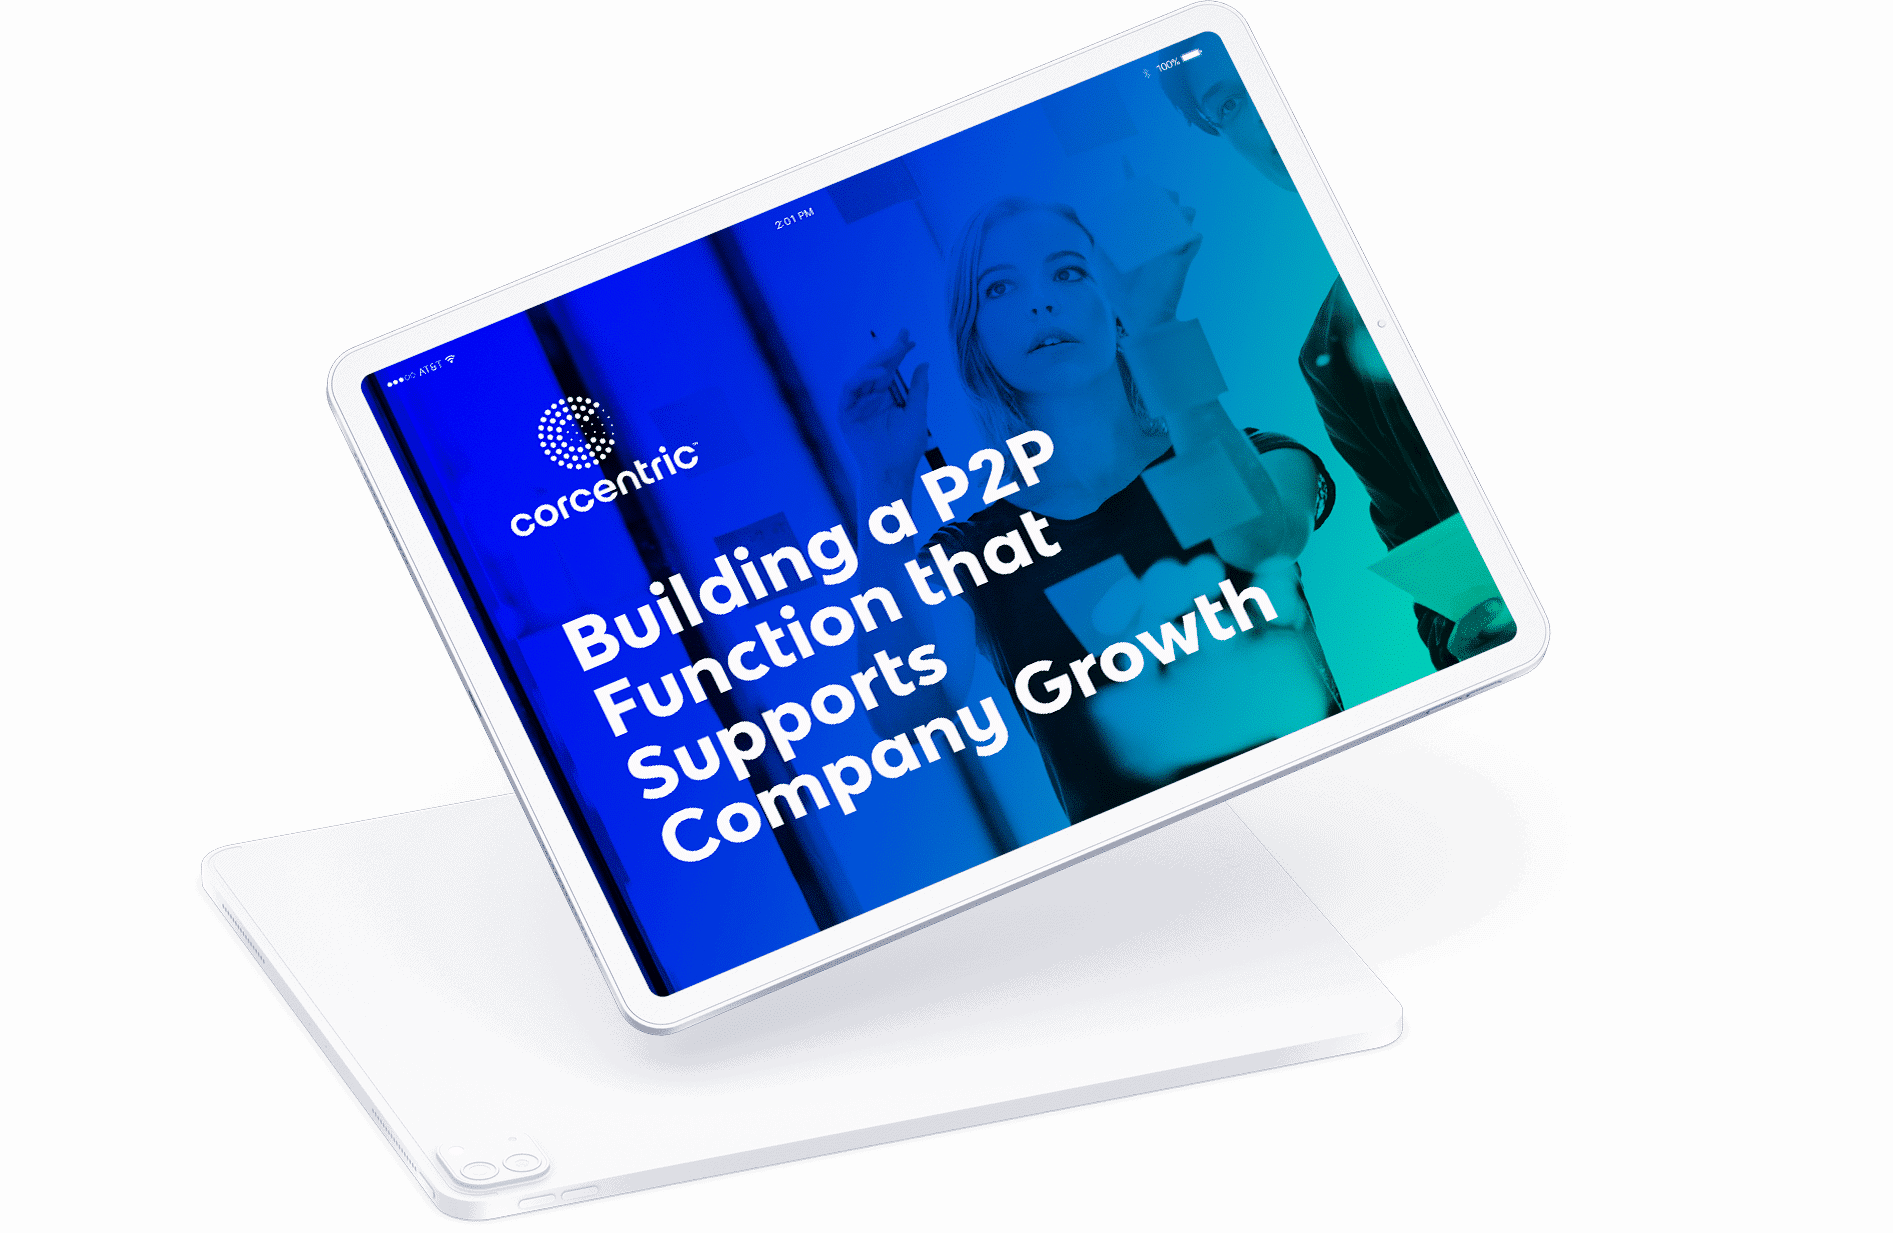 webinar-how-to-build-a-p2p-function-that-supports-company-growth-asset